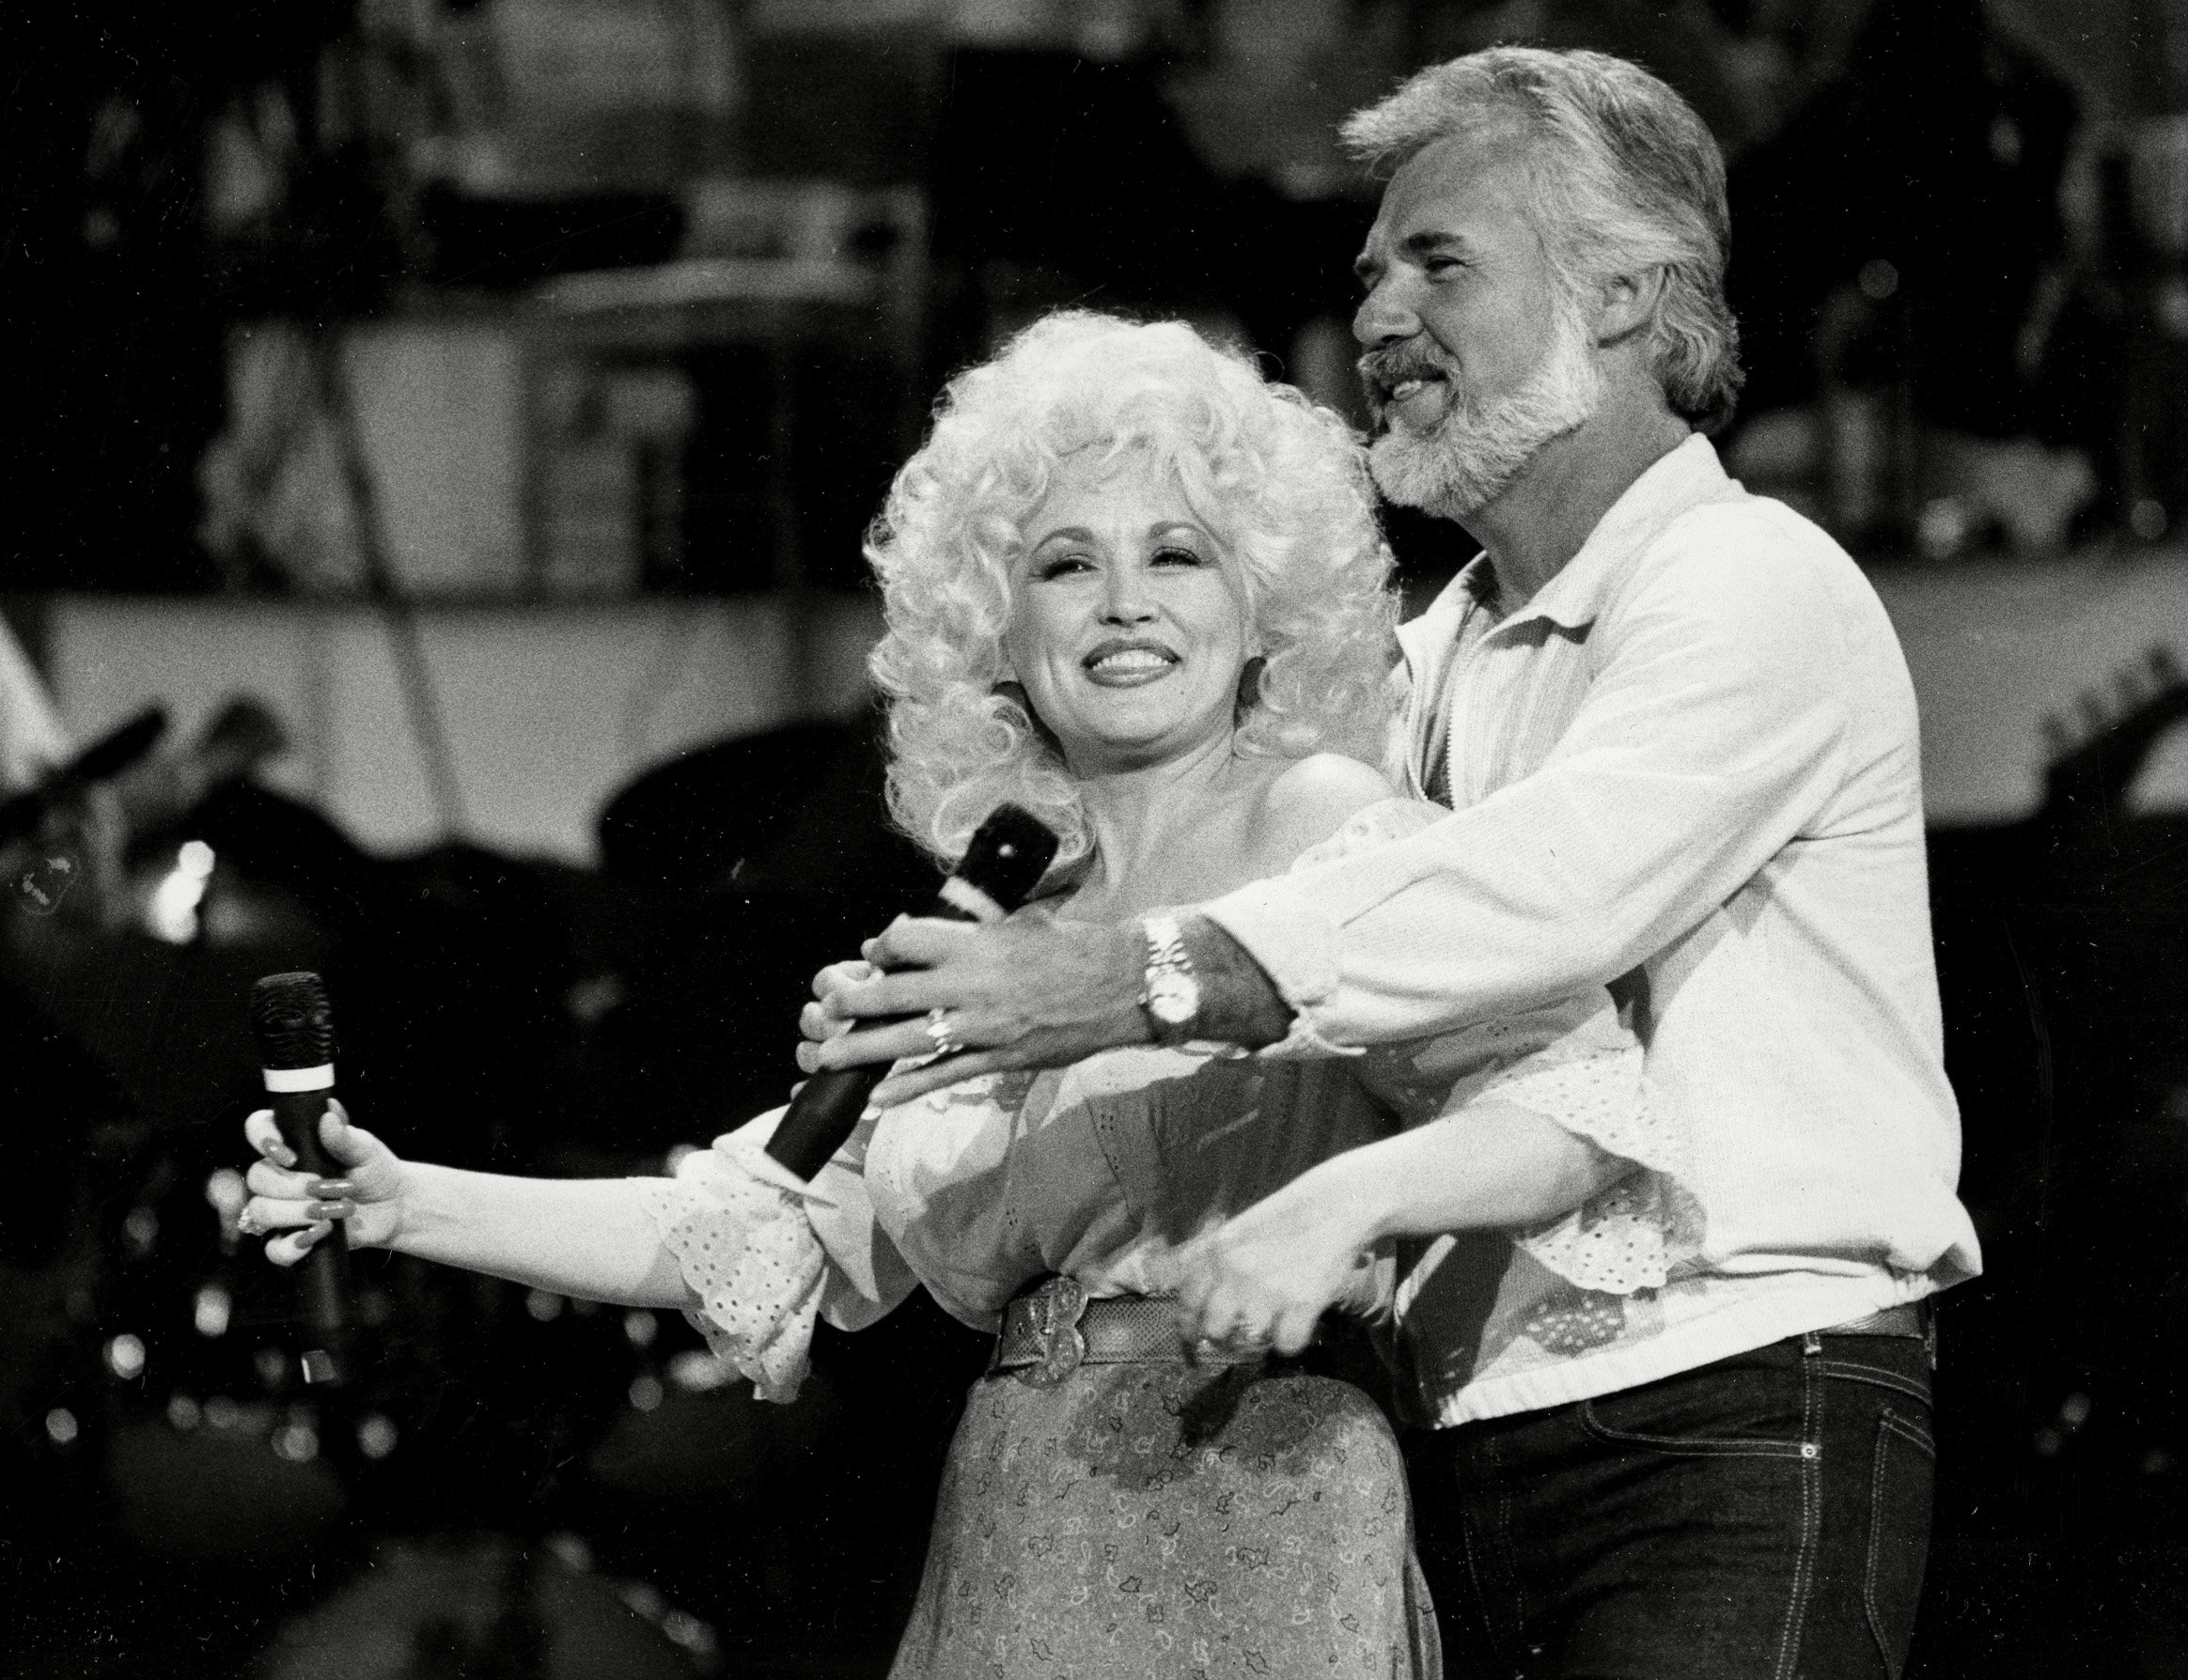 Dolly Parton and Kenny Rogers